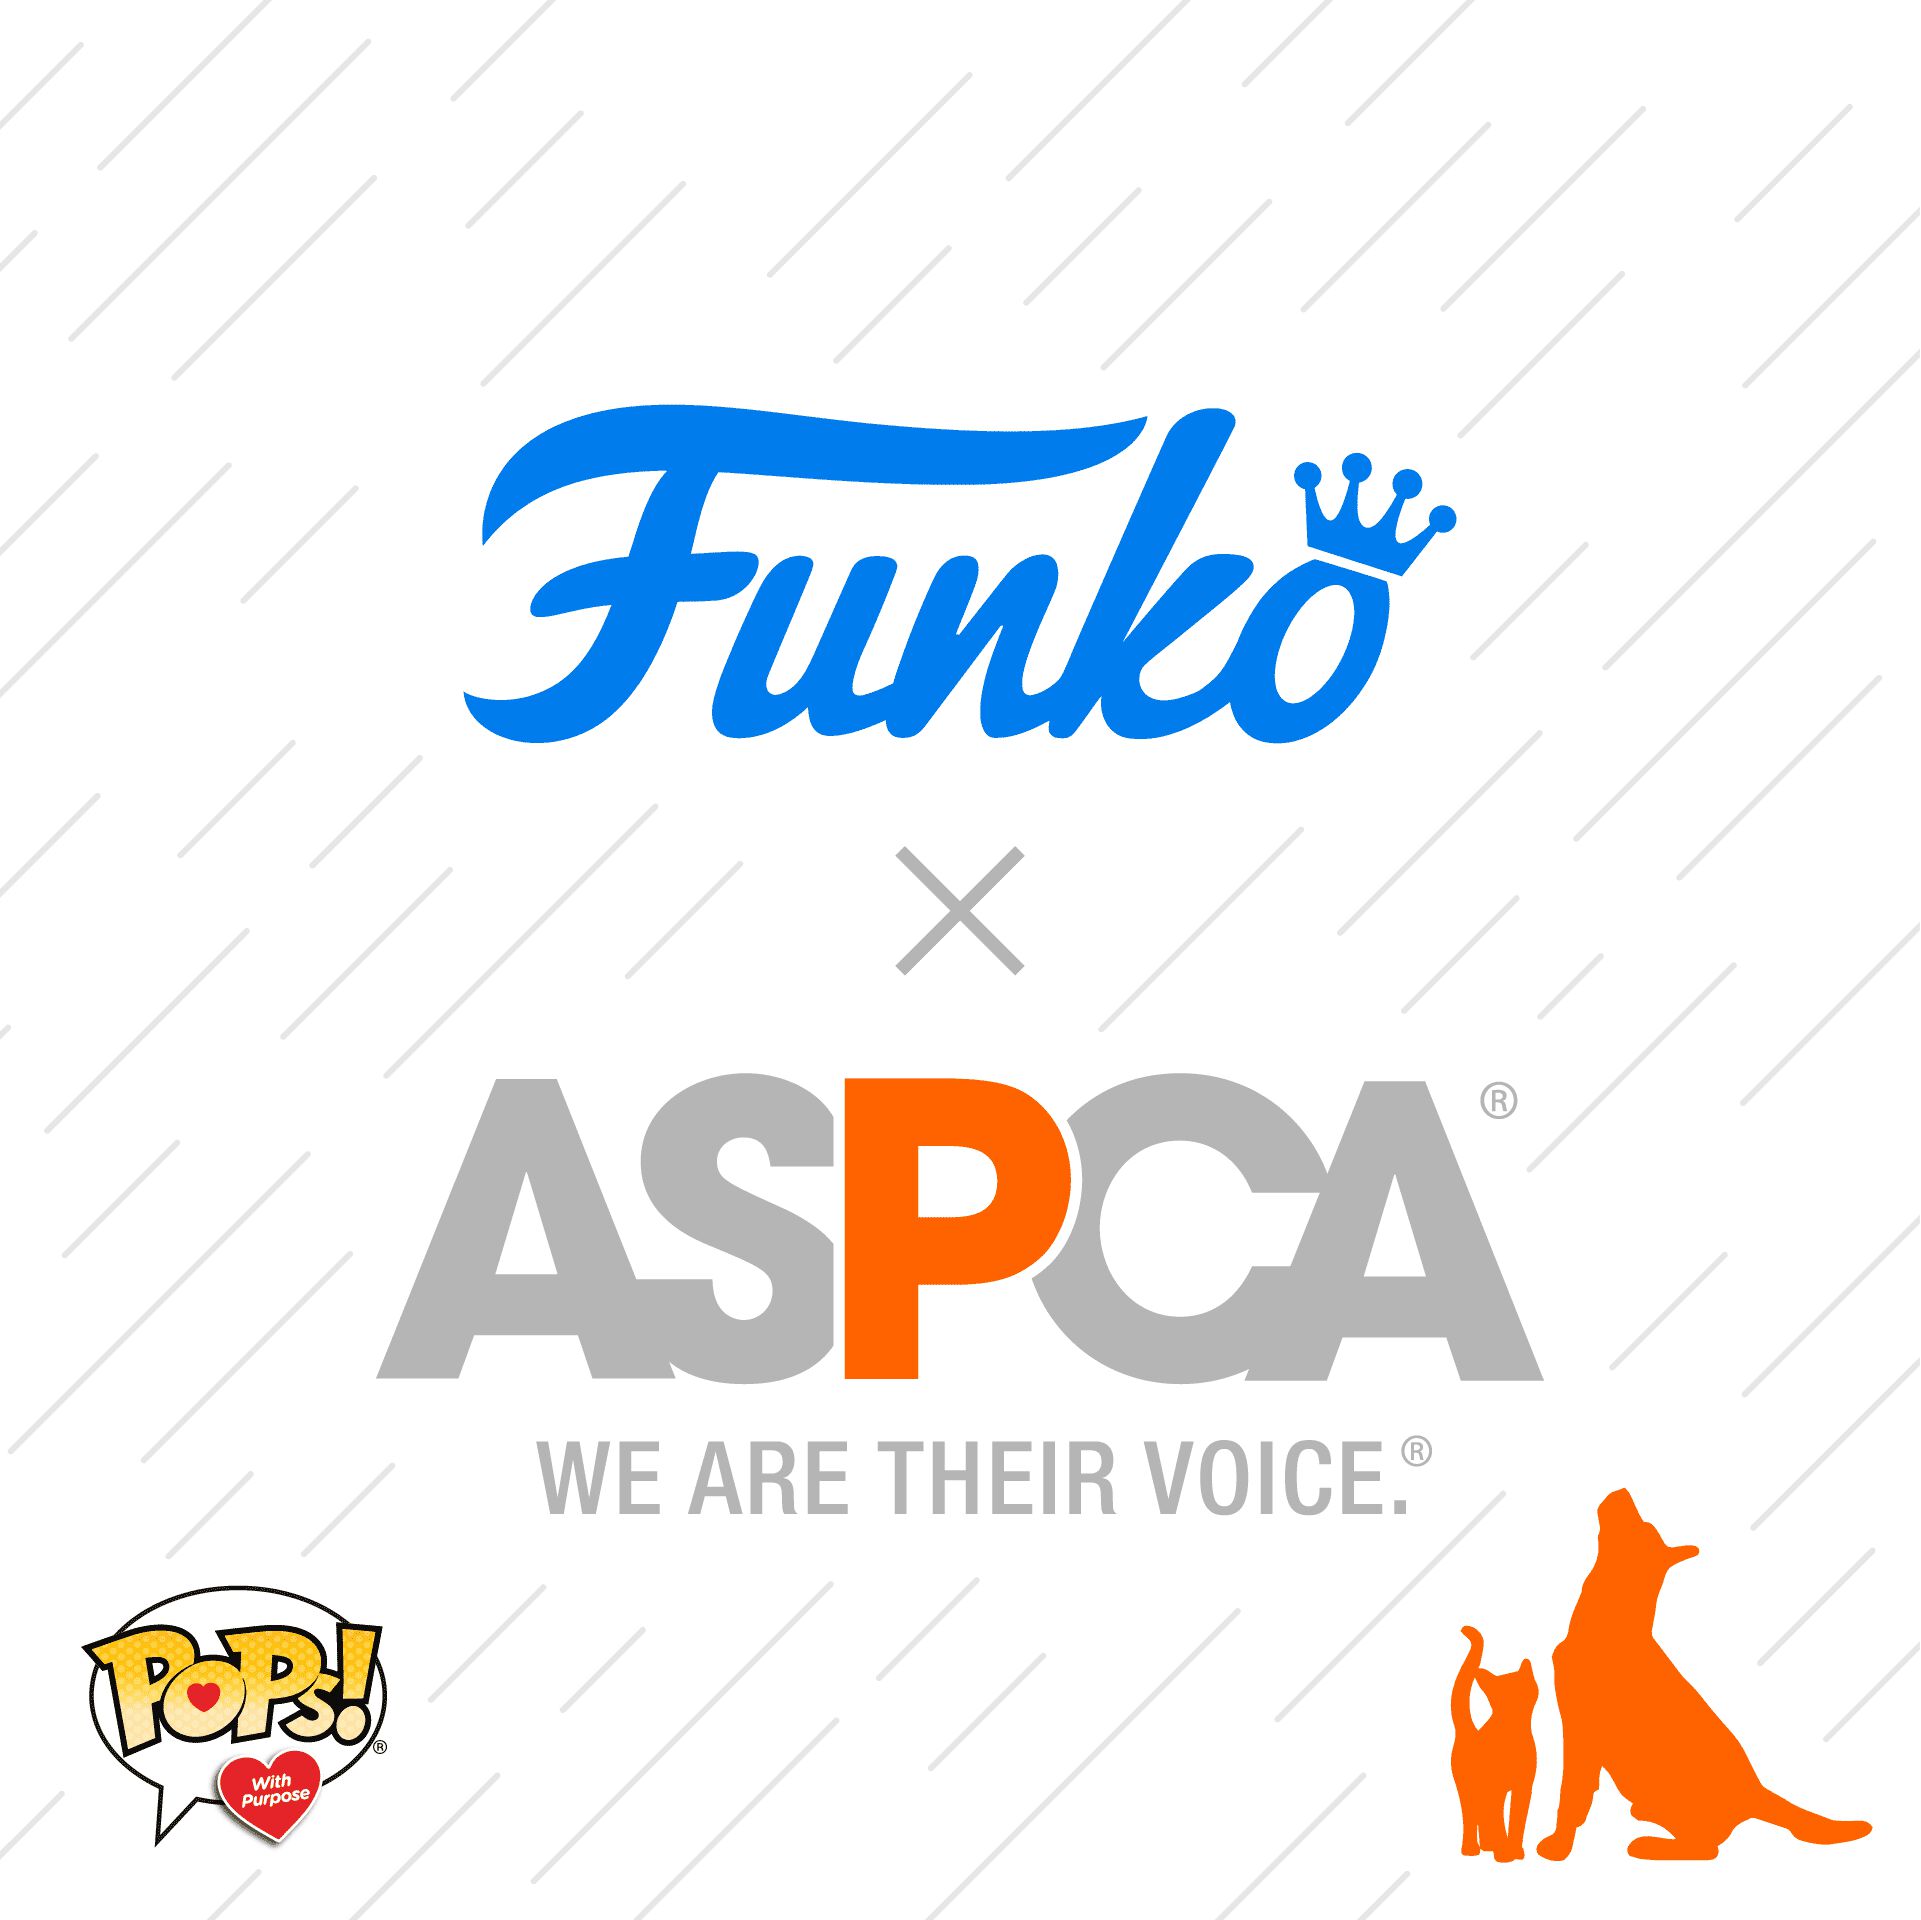 POPS! WITH PURPOSE – ASPCA® COLLECTION 2022